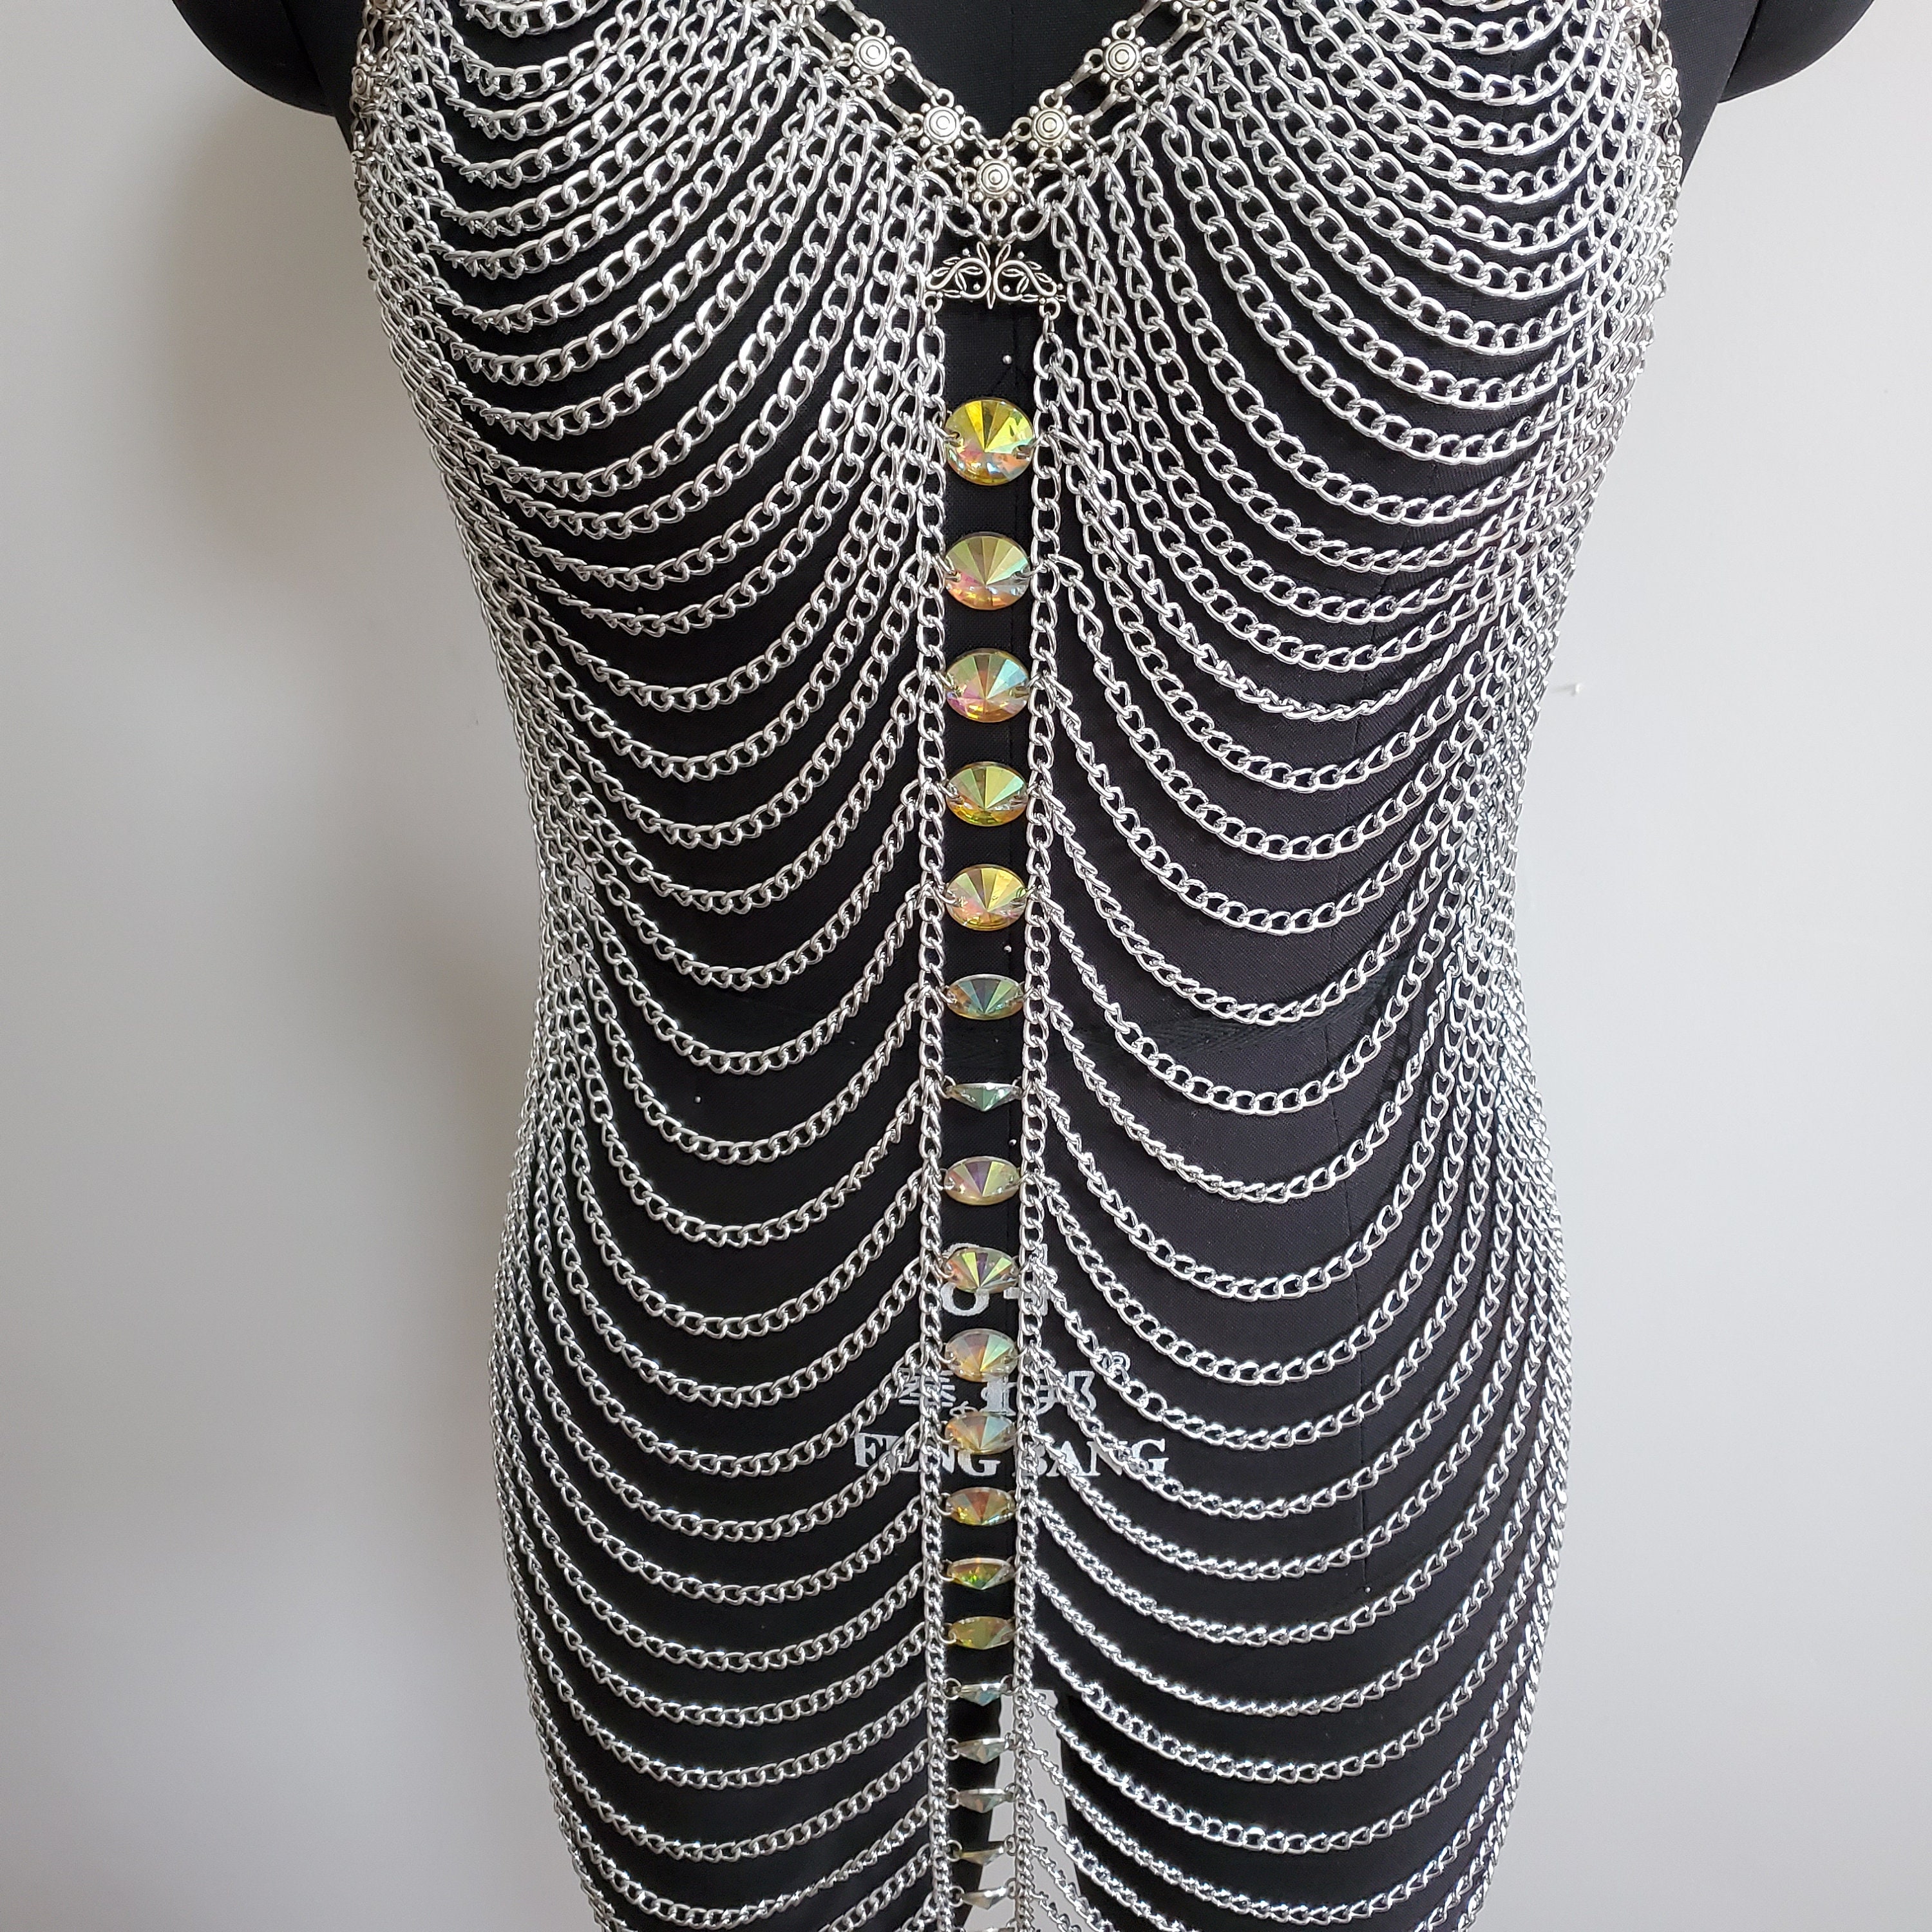 Body Chain Harness/Rhinestone Body Chain Dress/Dance Jewelry Chain/ Music  Festival Dress/ Burning Man Outfits/Carnival Costumes/Rave Outfit -   Portugal